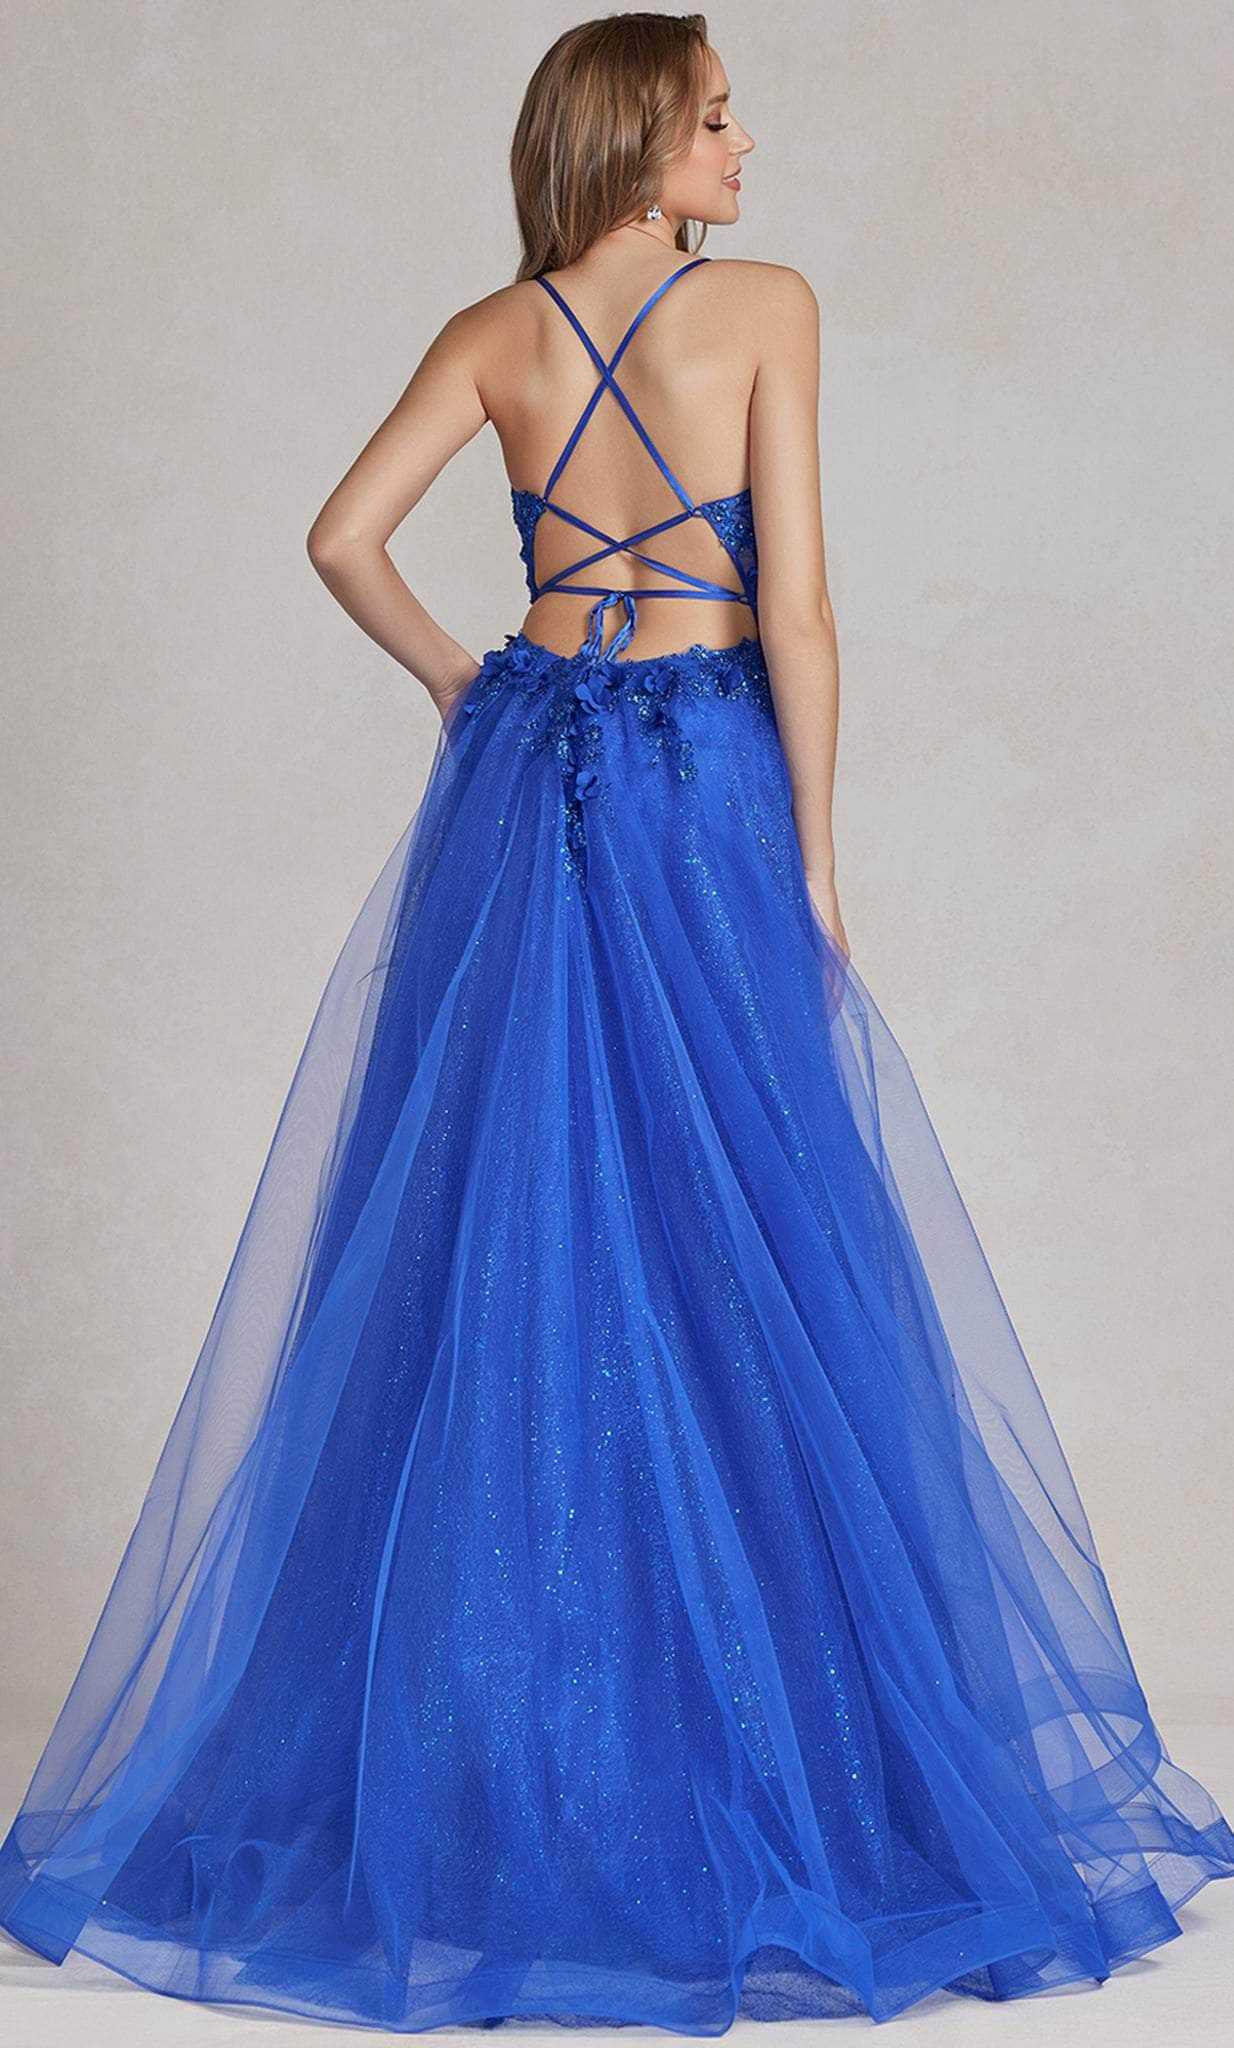 Nox Anabel, Nox Anabel C1113 - Tulle Skirt Prom Gown